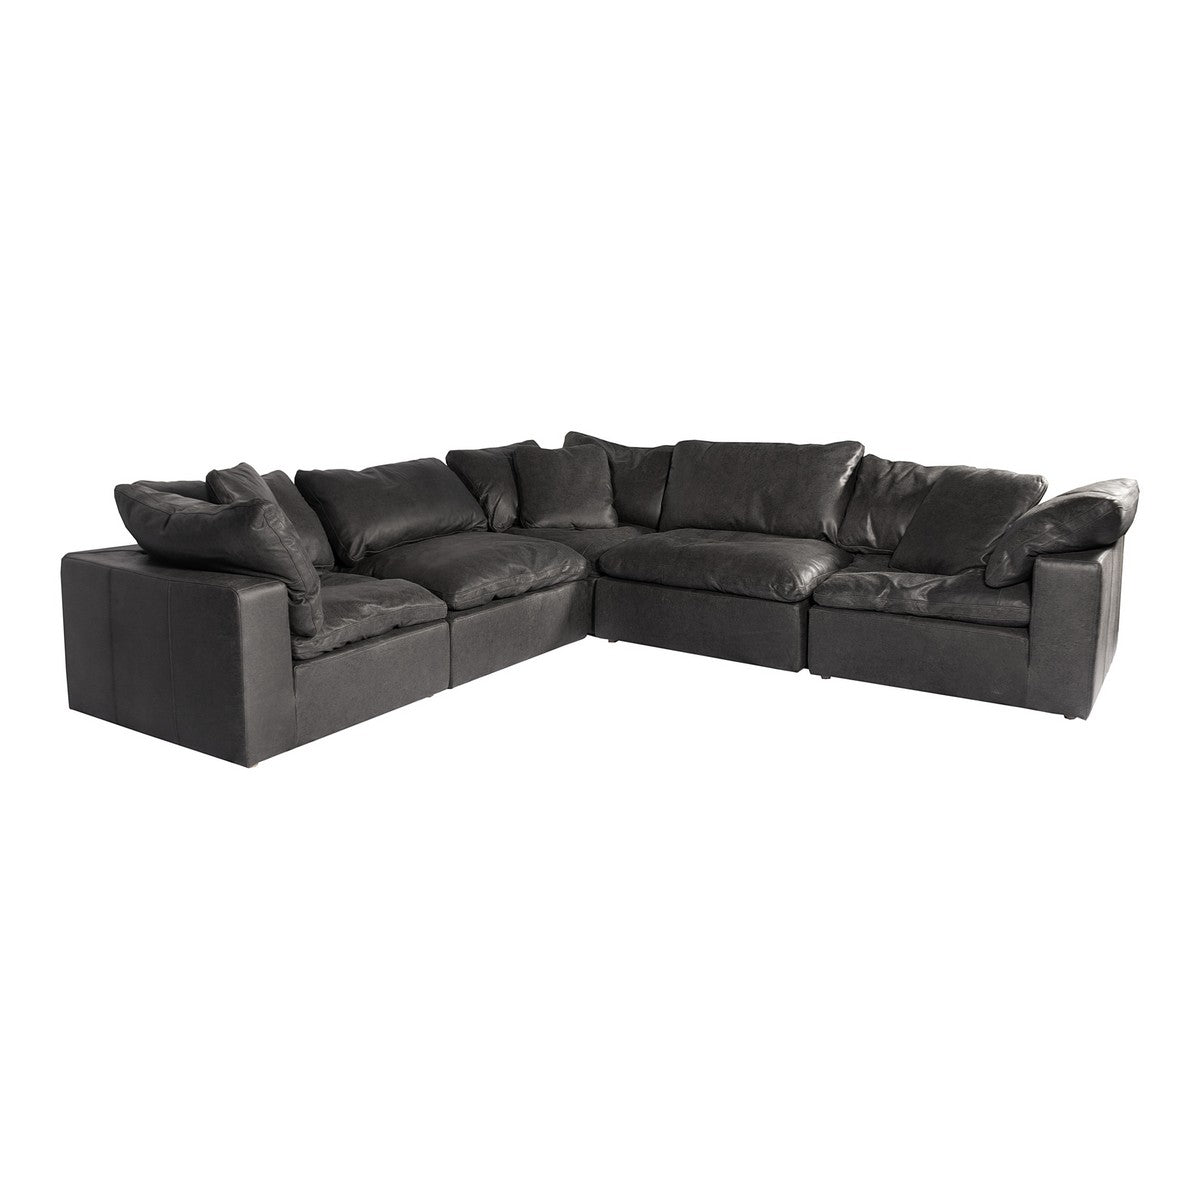 Moe's Home Collection Clay Classic L Modular Sectional Nubuck Leather Black - YJ-1010-02